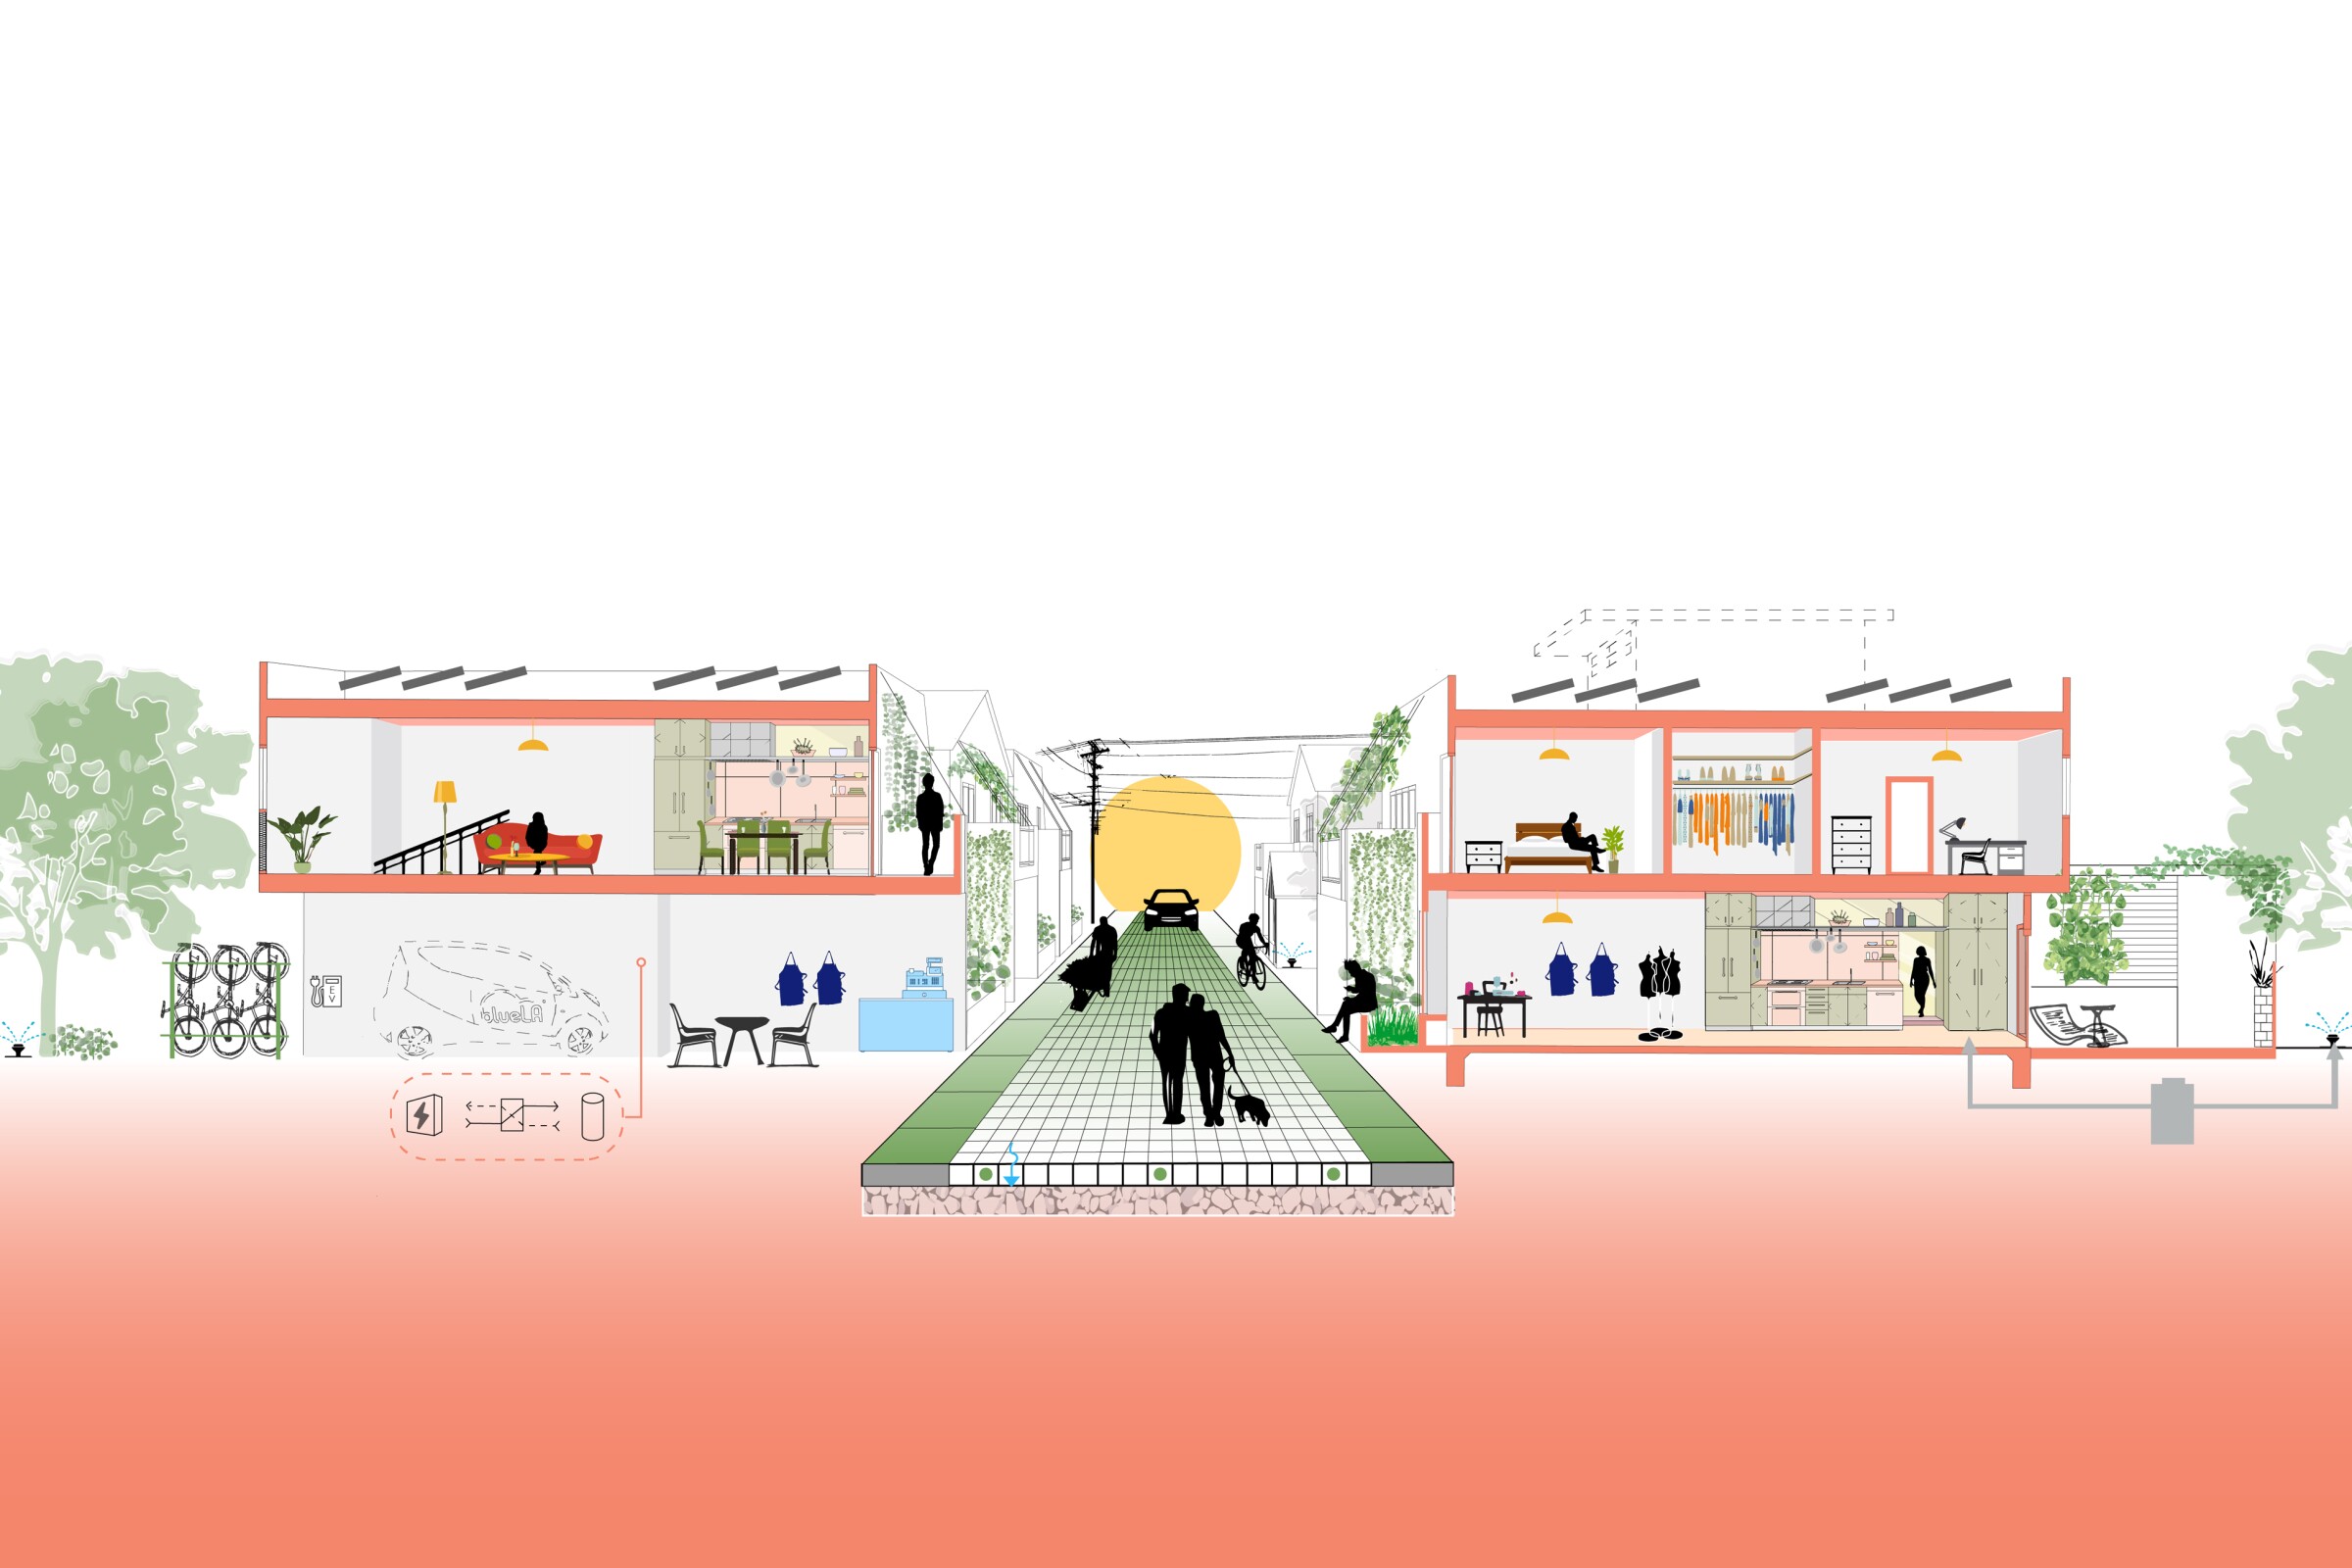 A digital drawing shows a cross-section of an alleyway surrounded by low-rise housing and work spaces.